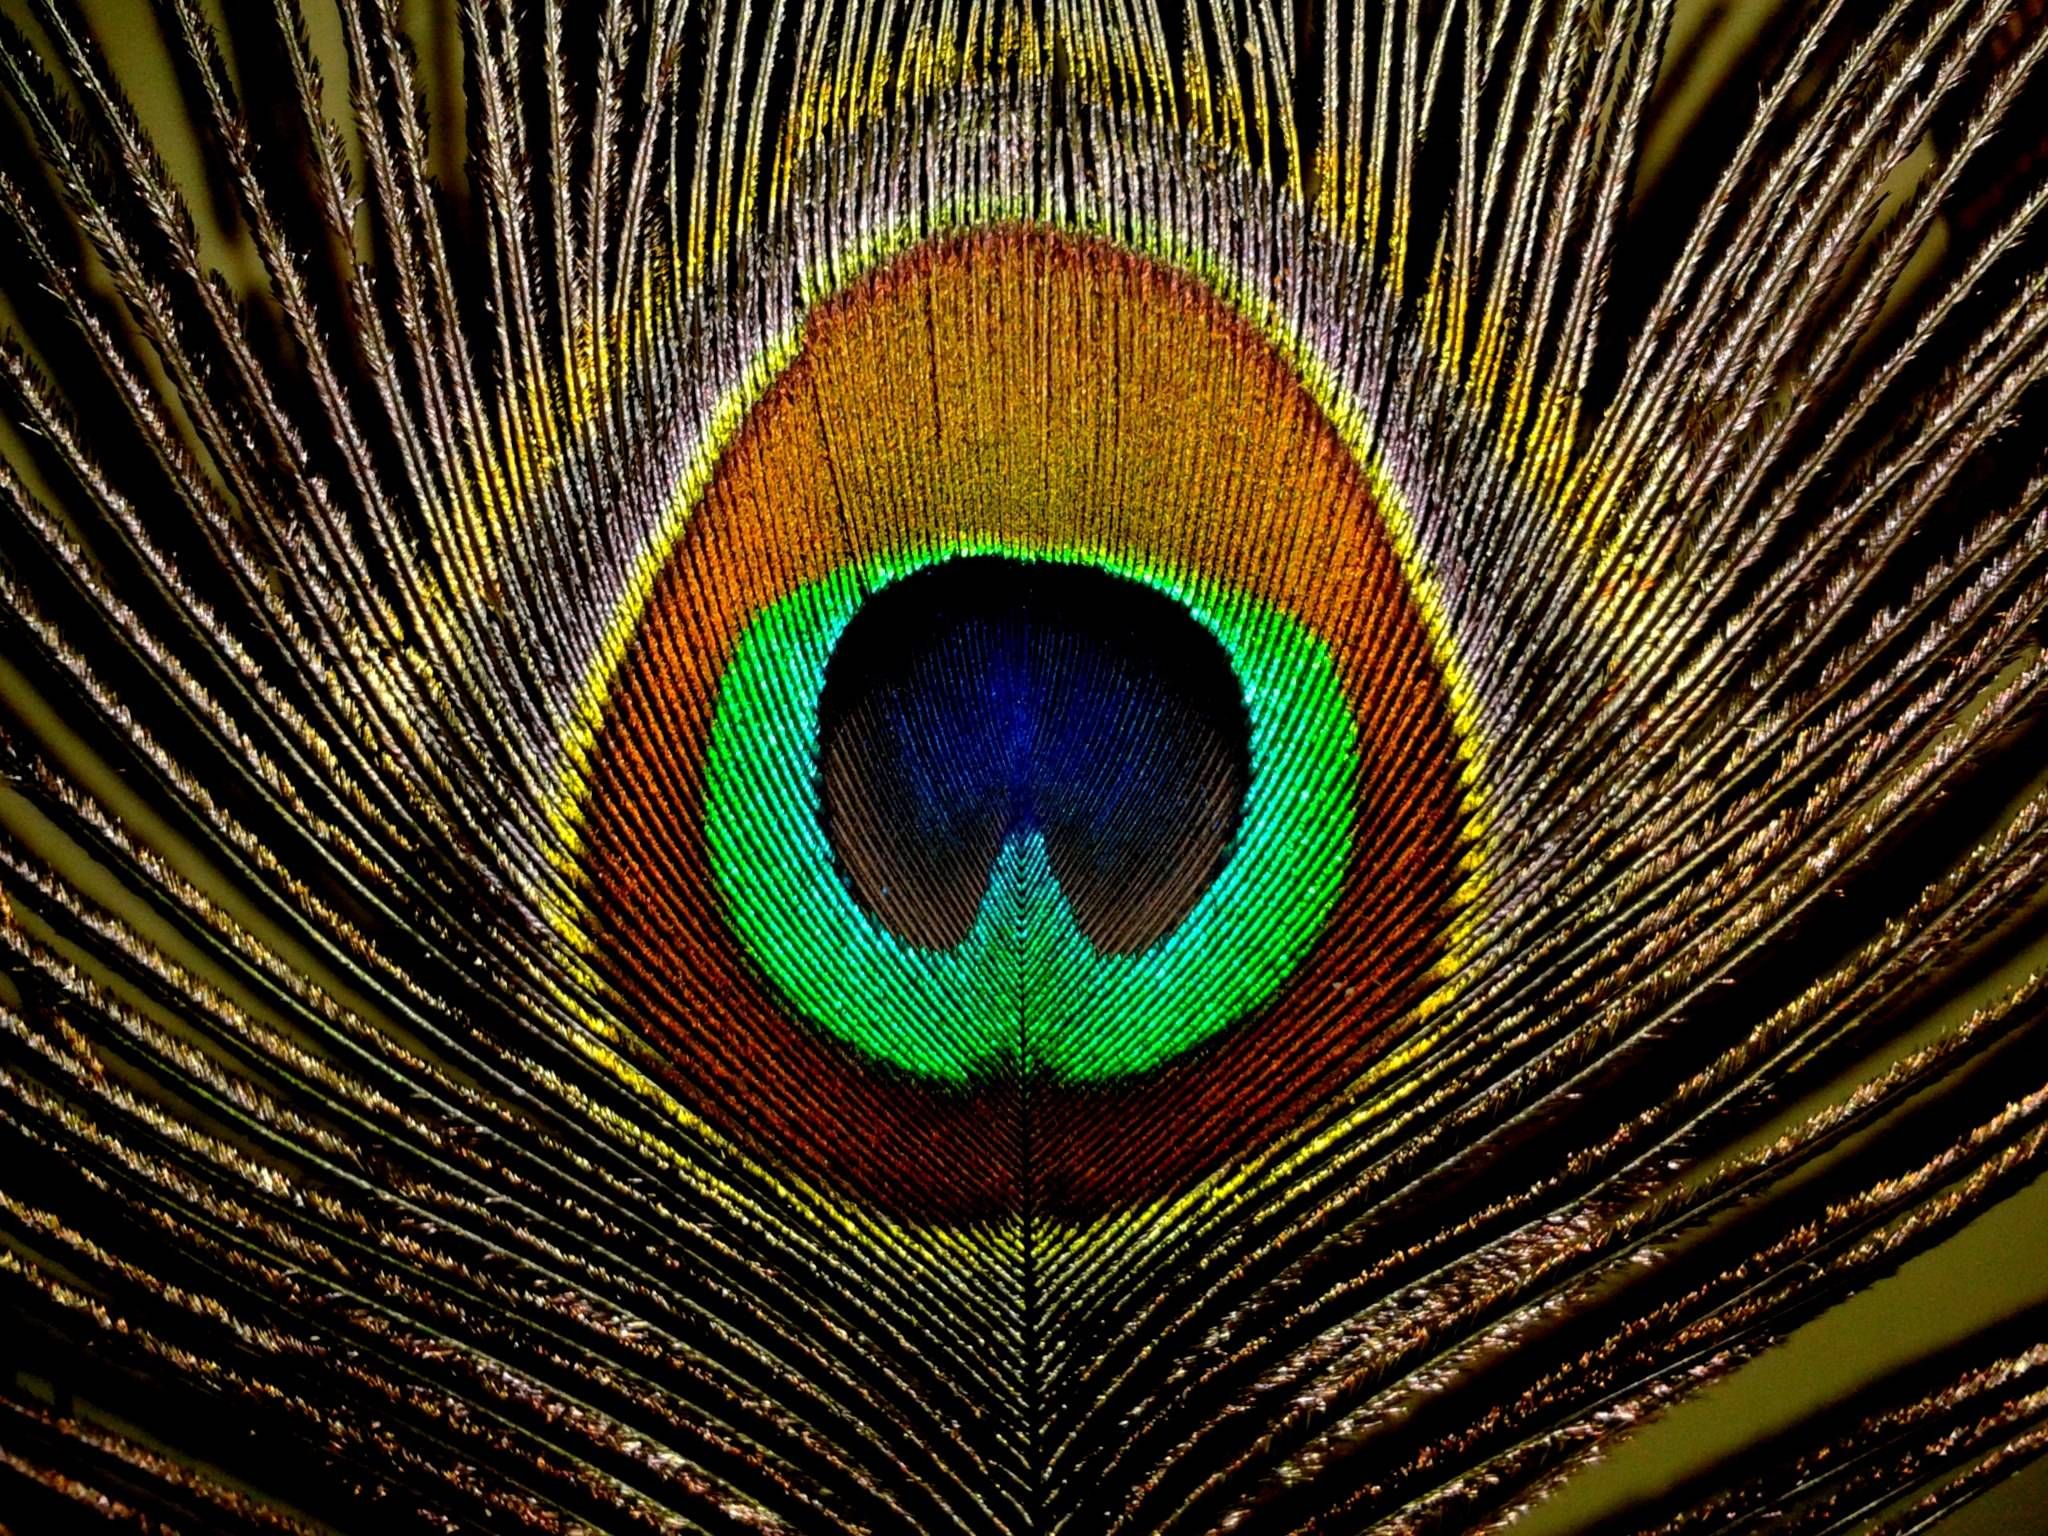 2048x1536 Wallpapers Of Peacock Feathers HD 2015 | Feather wallpaper, Peacock feathers, Peacock